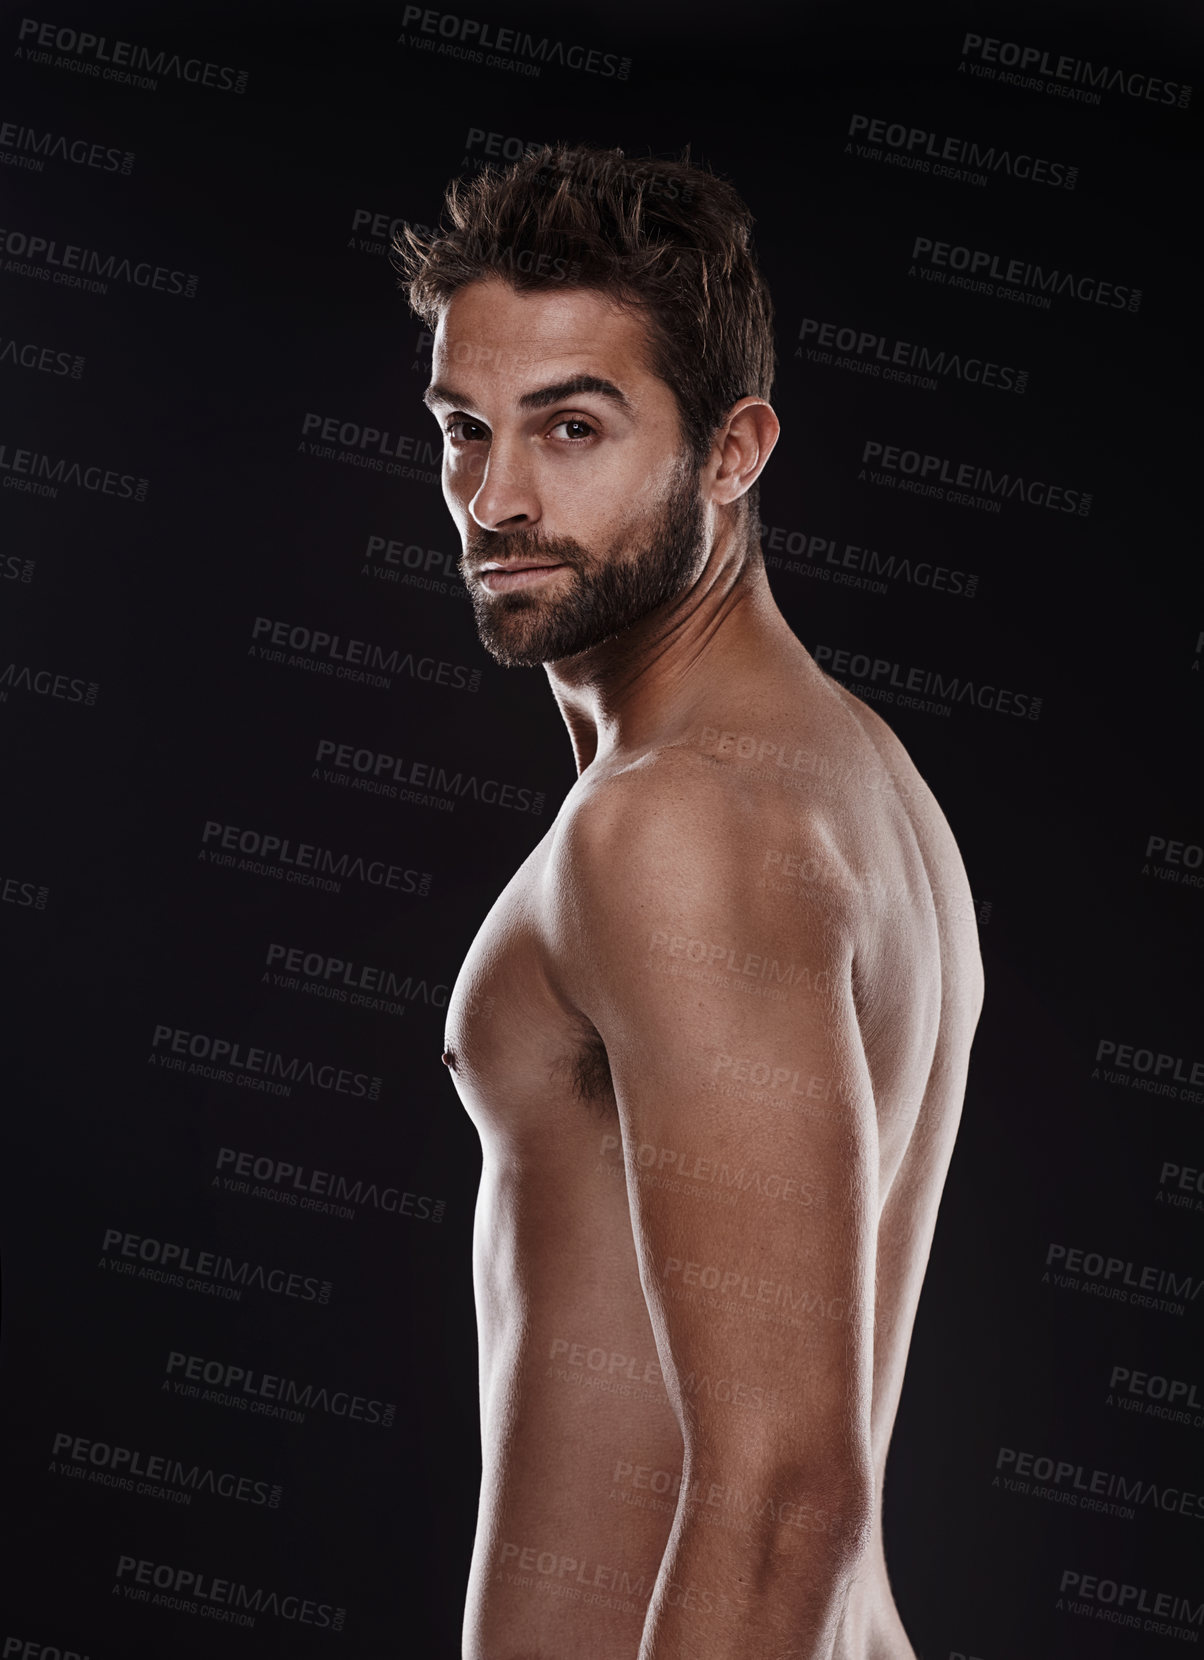 Buy stock photo Portrait of a handsome man standing shirtless against a black background